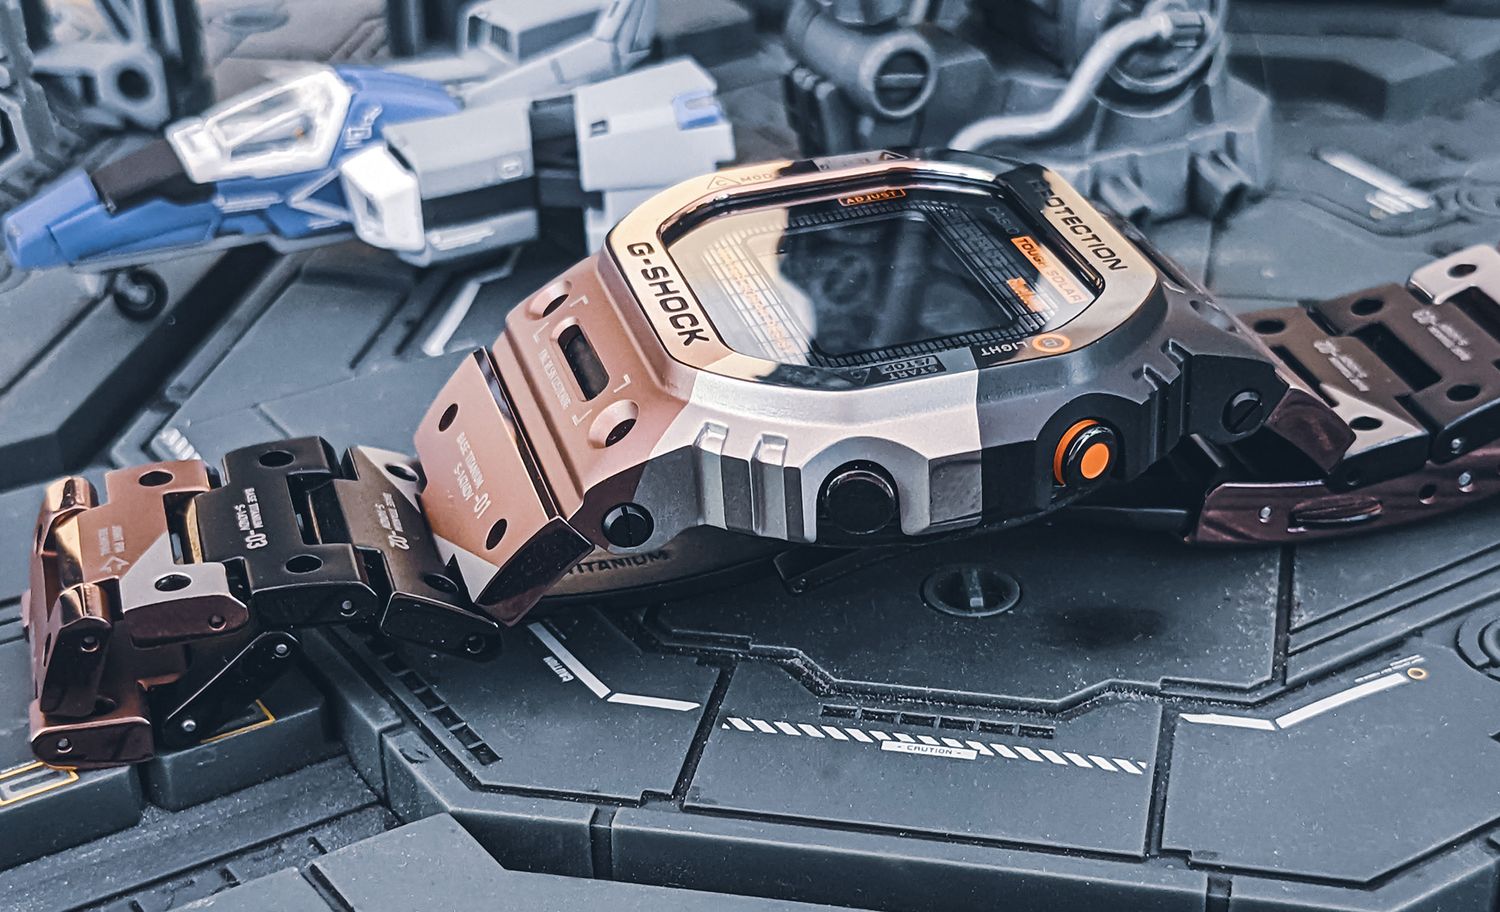 a-sequel-to-g-shocks-awesome-sci-fi-mecha-watch-is-coming